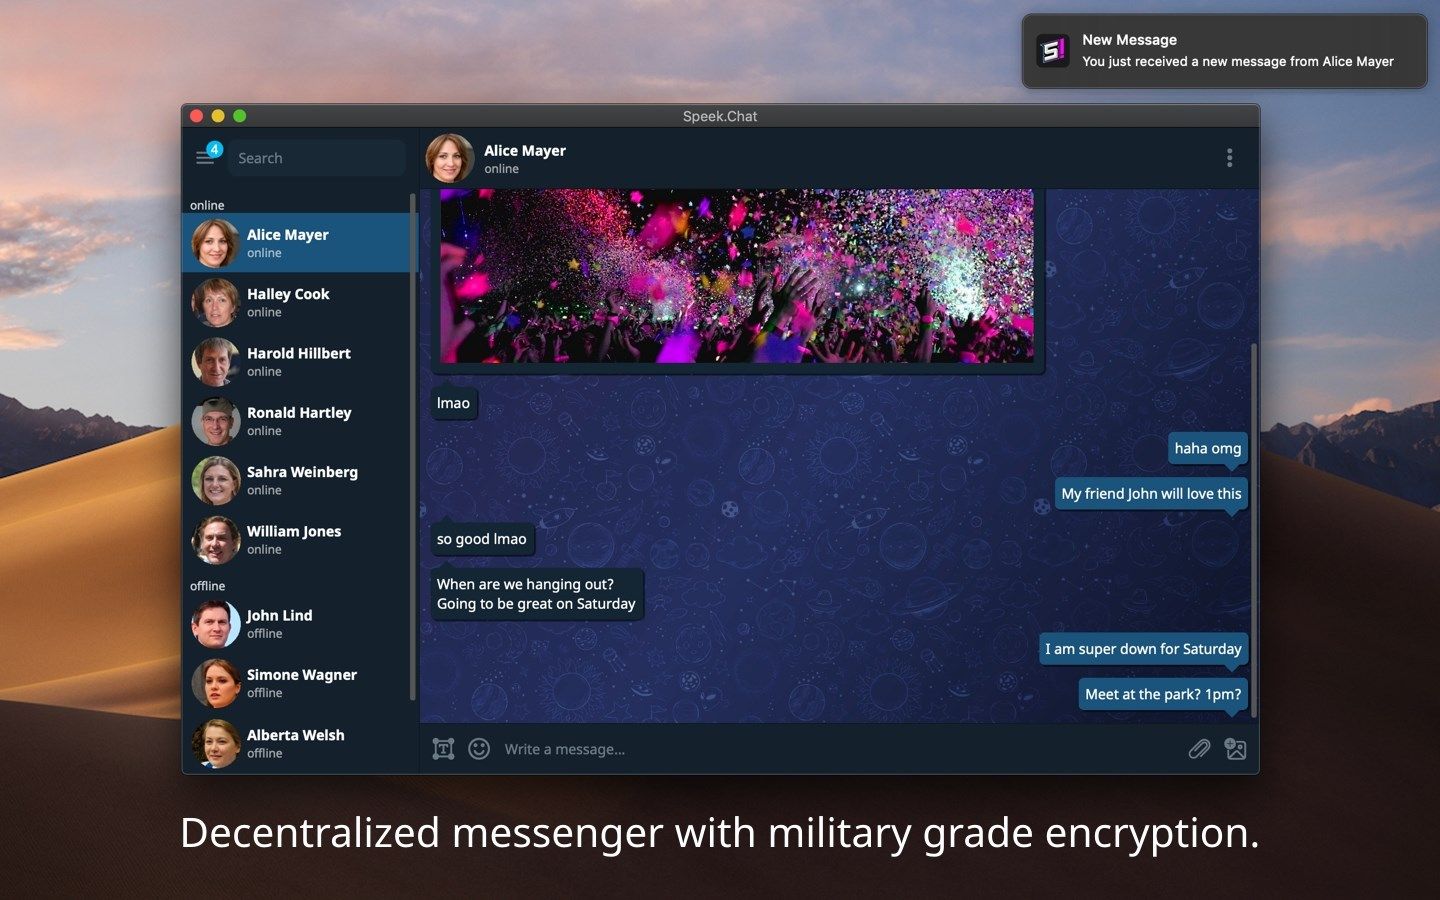 Decentralized messenger with military grade encryption.